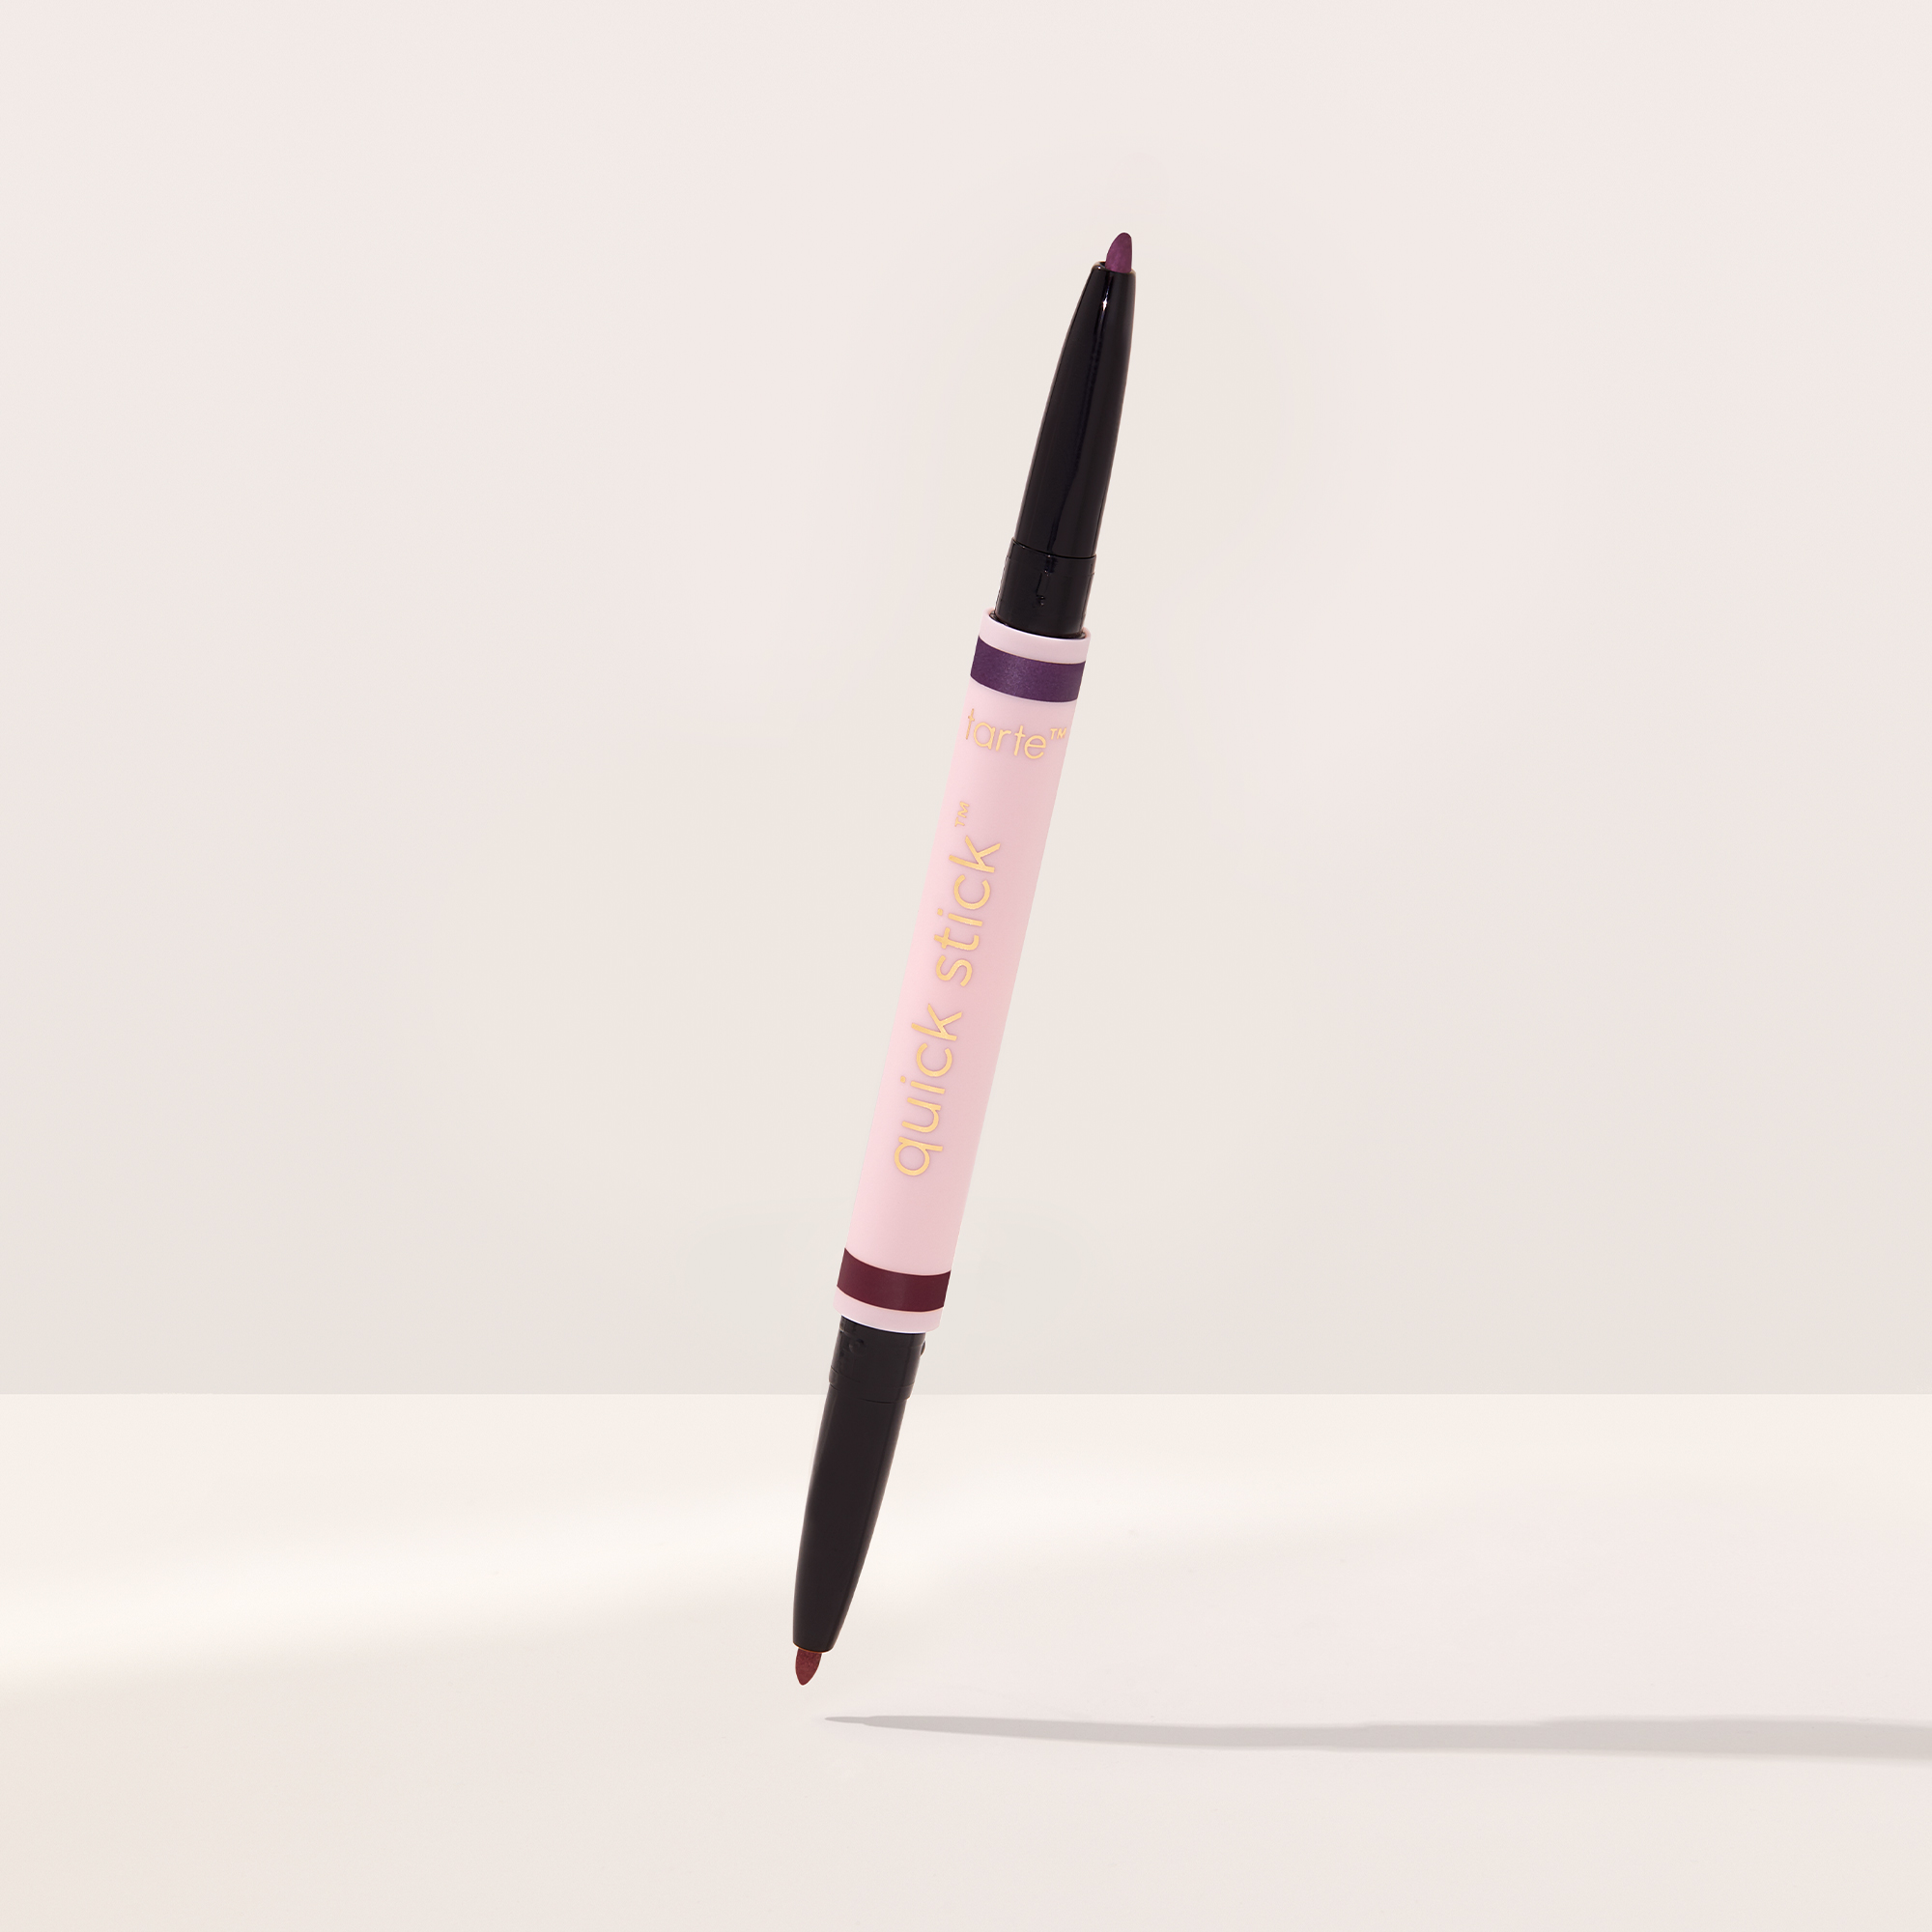 Tarte Cosmetics Quick Stickâ?¢ Double-ended Gel Liner In White